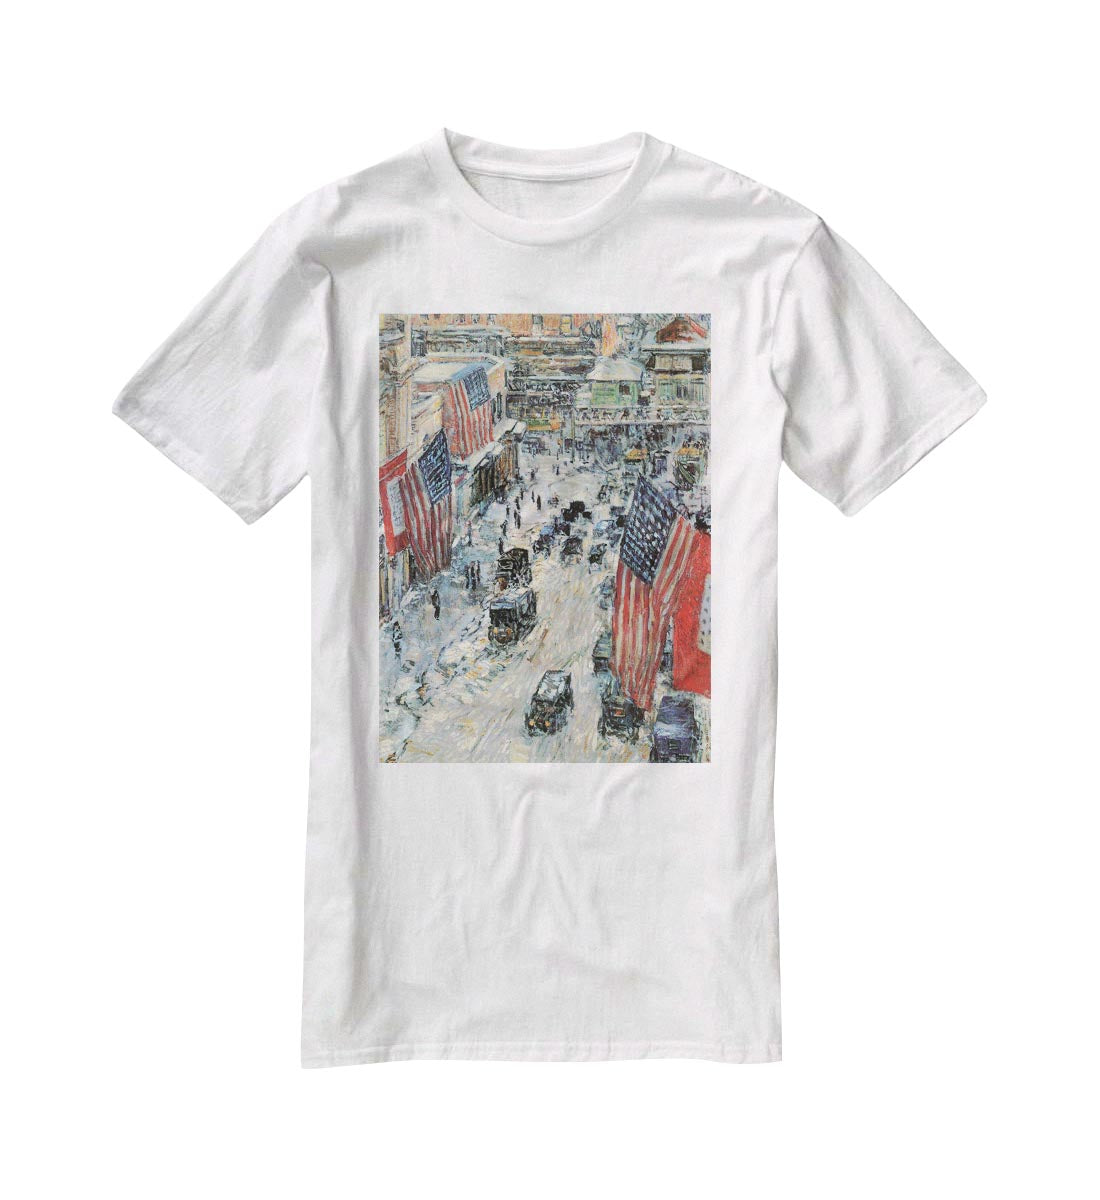 Flags on Fifth Avenue Winter 1918 by Hassam T-Shirt - Canvas Art Rocks - 5